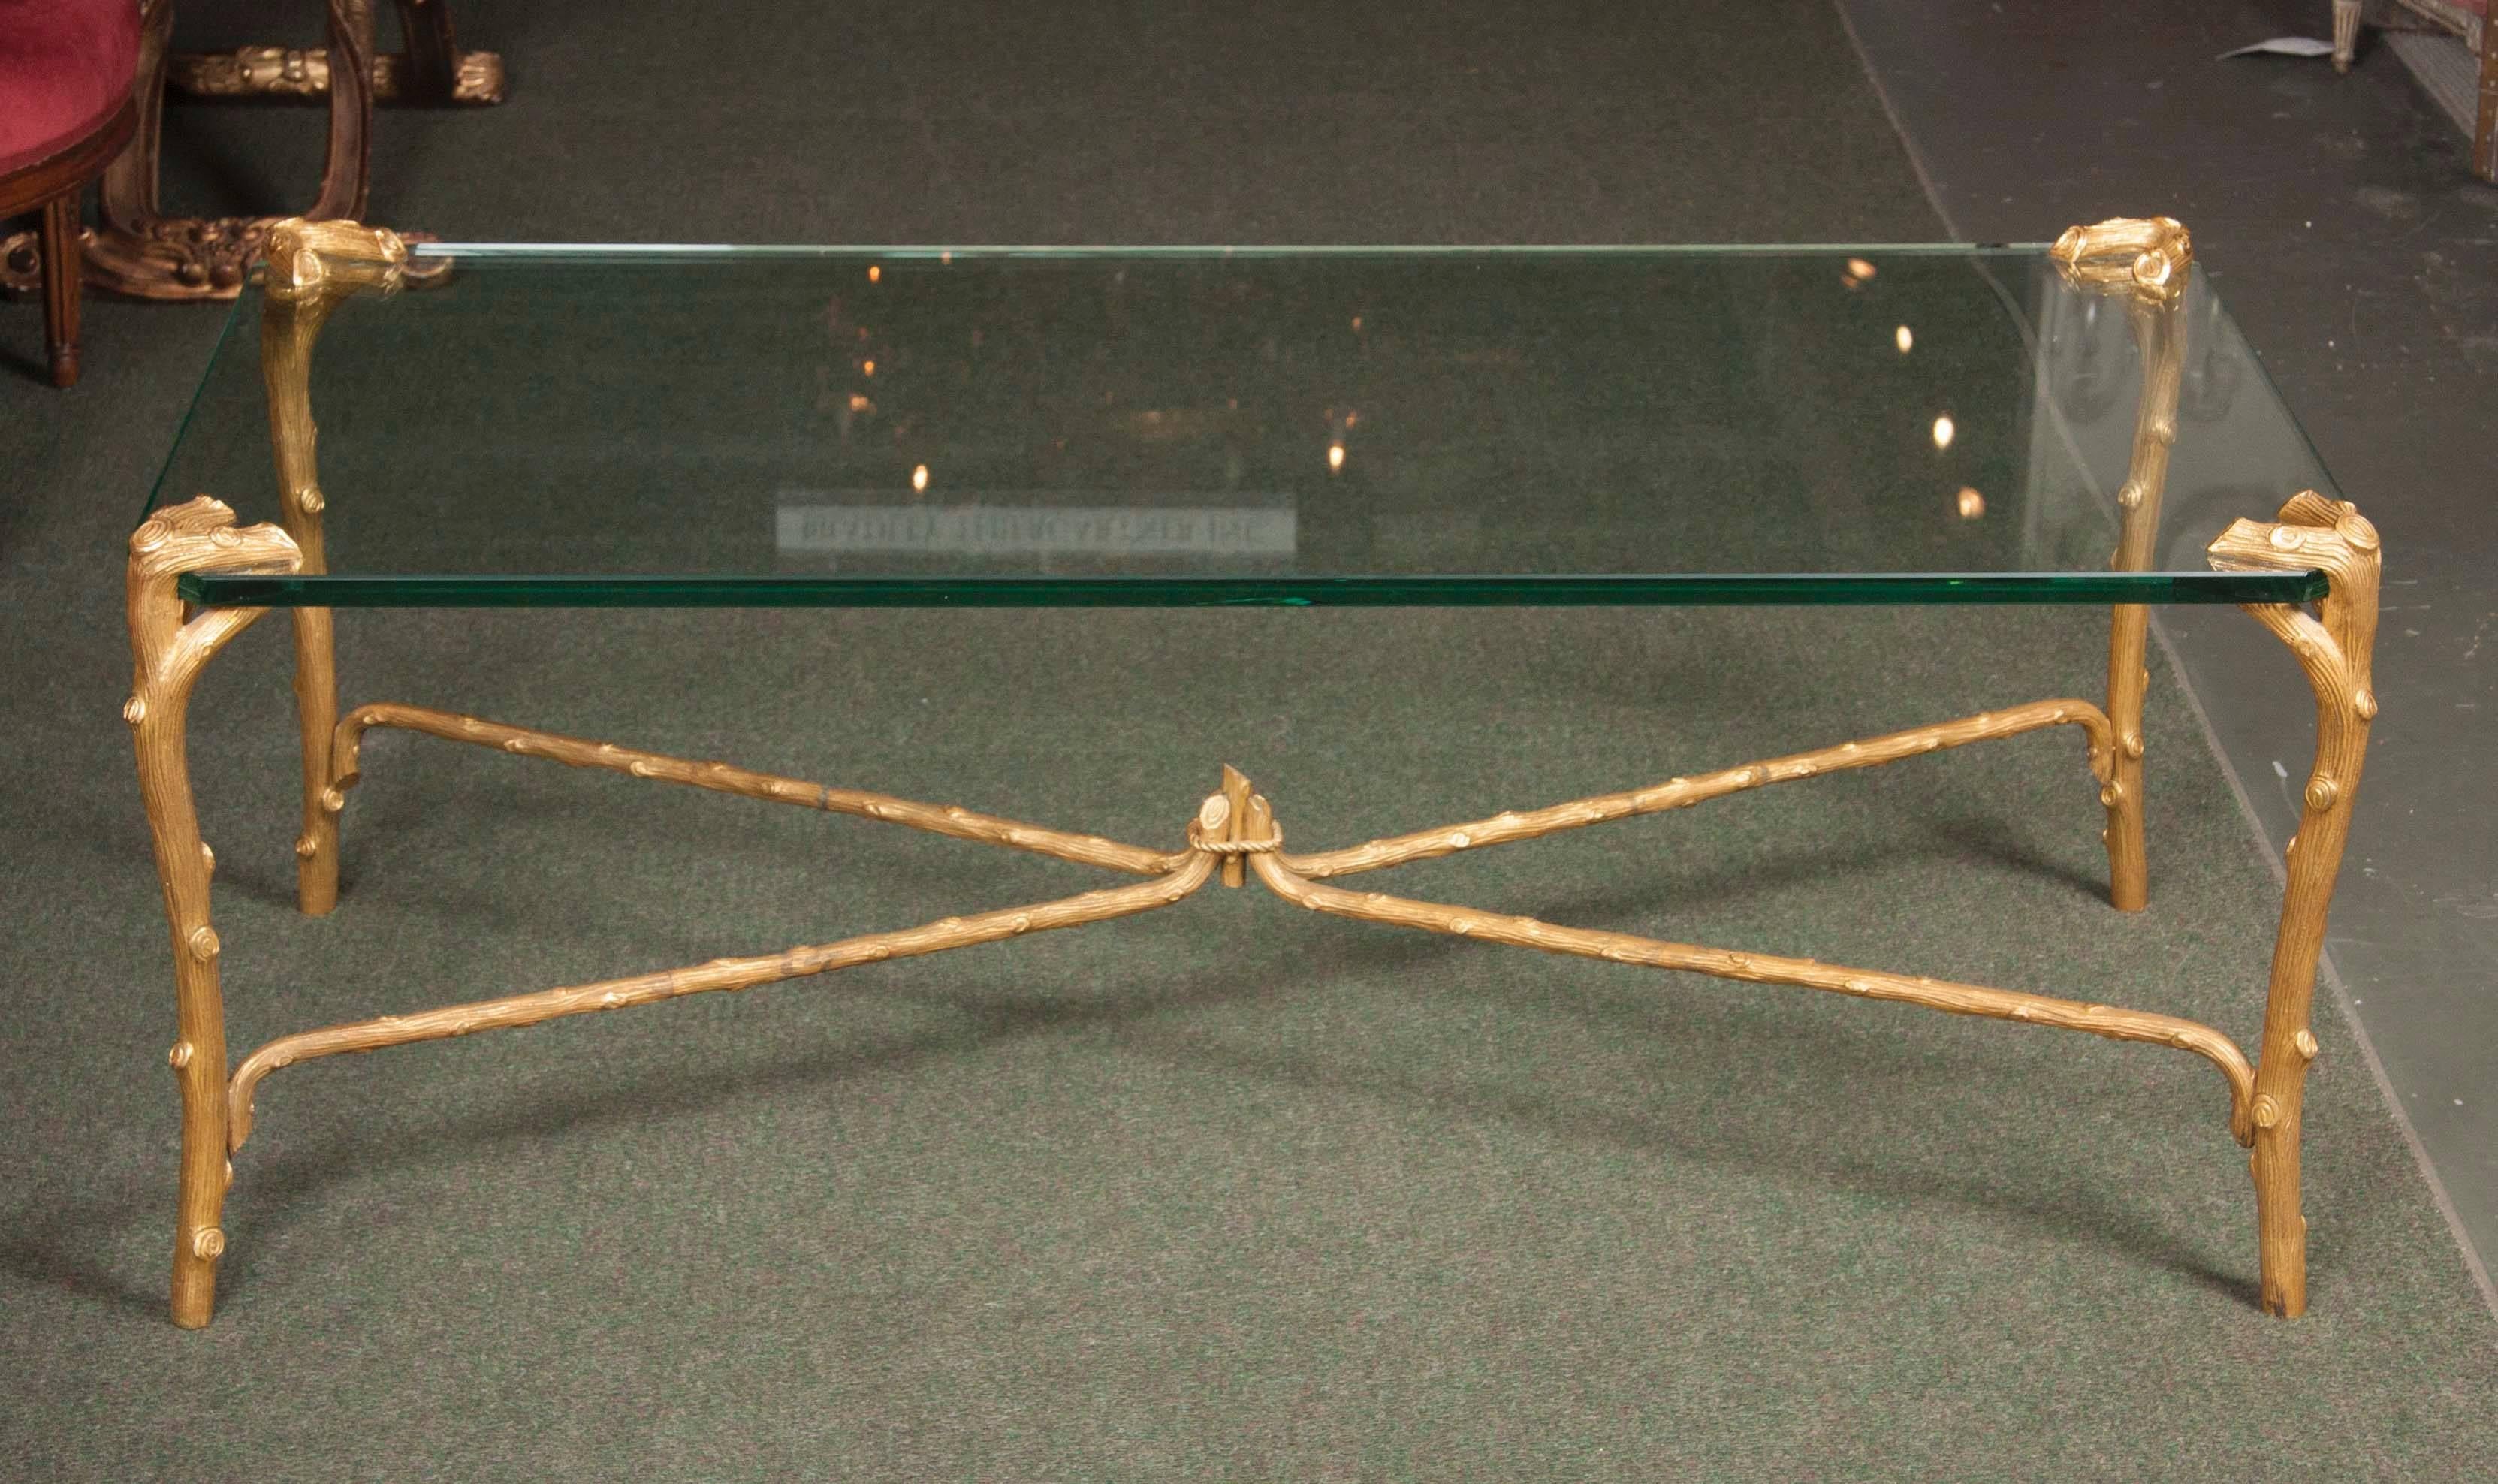 A mid-20th century faux-bois, 24-karat gold-plated brass coffee table by  P. E. Guerin,  with glass top.
Popularized by Melanie Kahane in the 1960s.